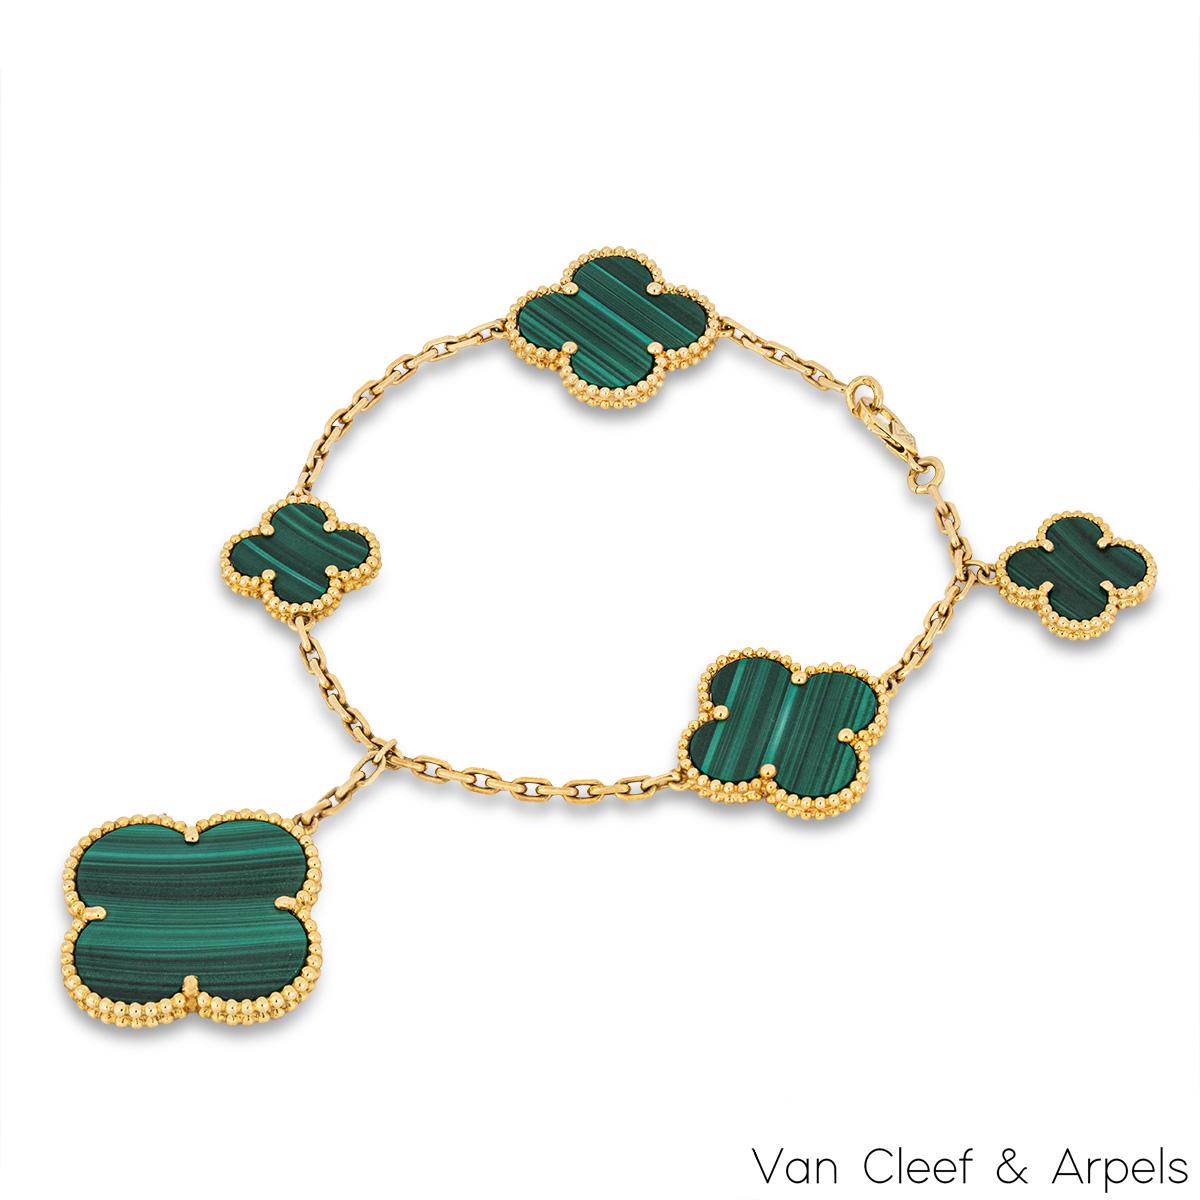 A luxurious 18k yellow gold malachite bracelet by Van Cleef & Arpels from the Magic Alhambra collection. The bracelet features 5 four leaf clover motifs that vary in size, set to the centre with a malachite inlay and complemented with a beaded outer